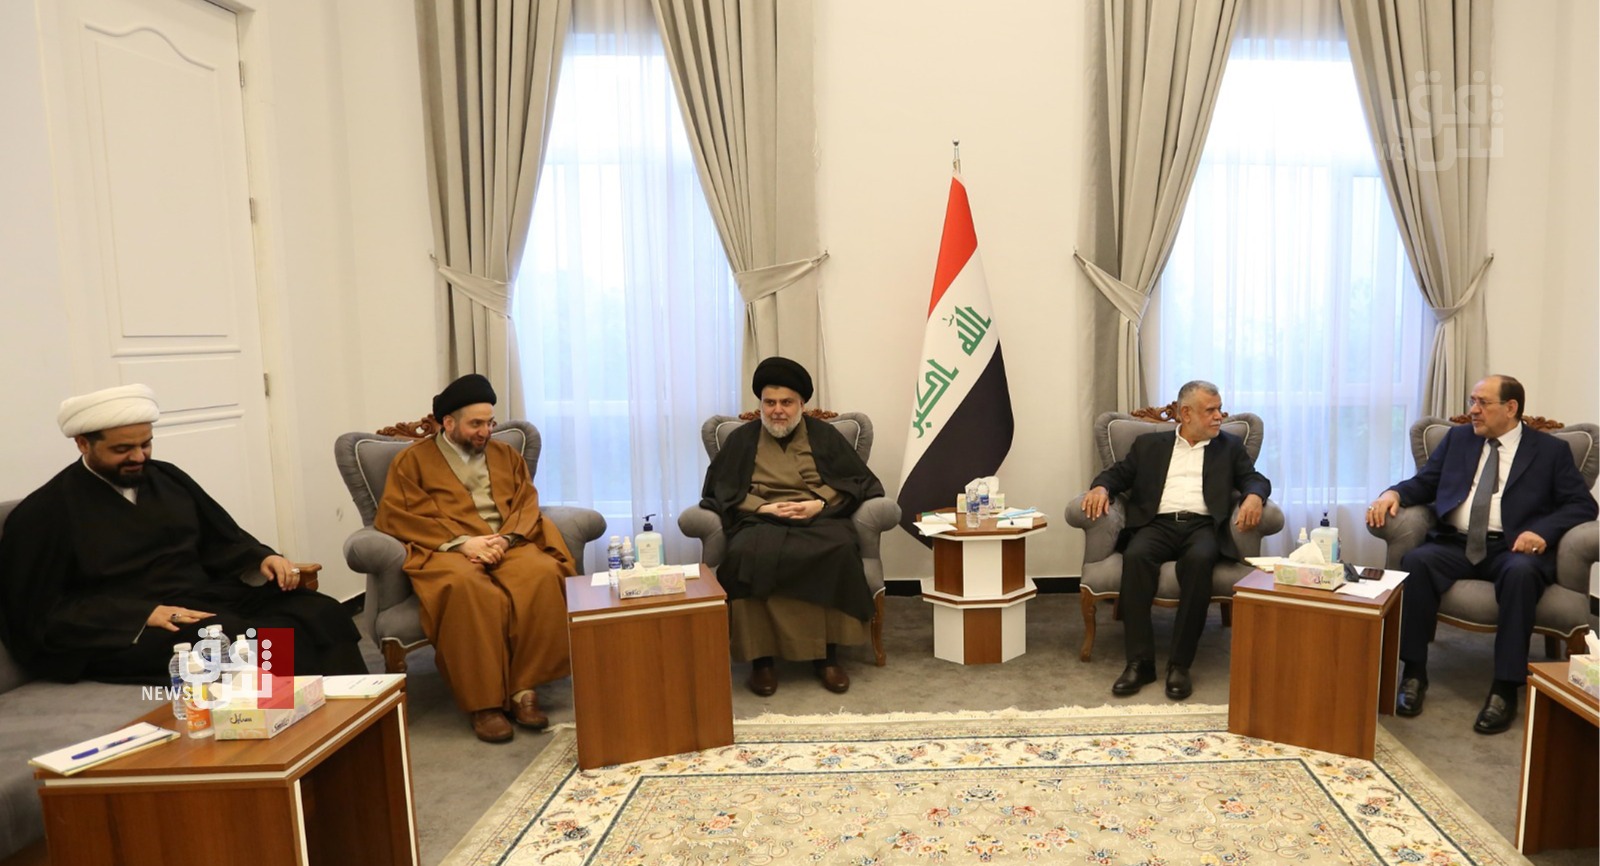 The coordination framework presents 4 candidates for prime minister in front of the Sadr candidate